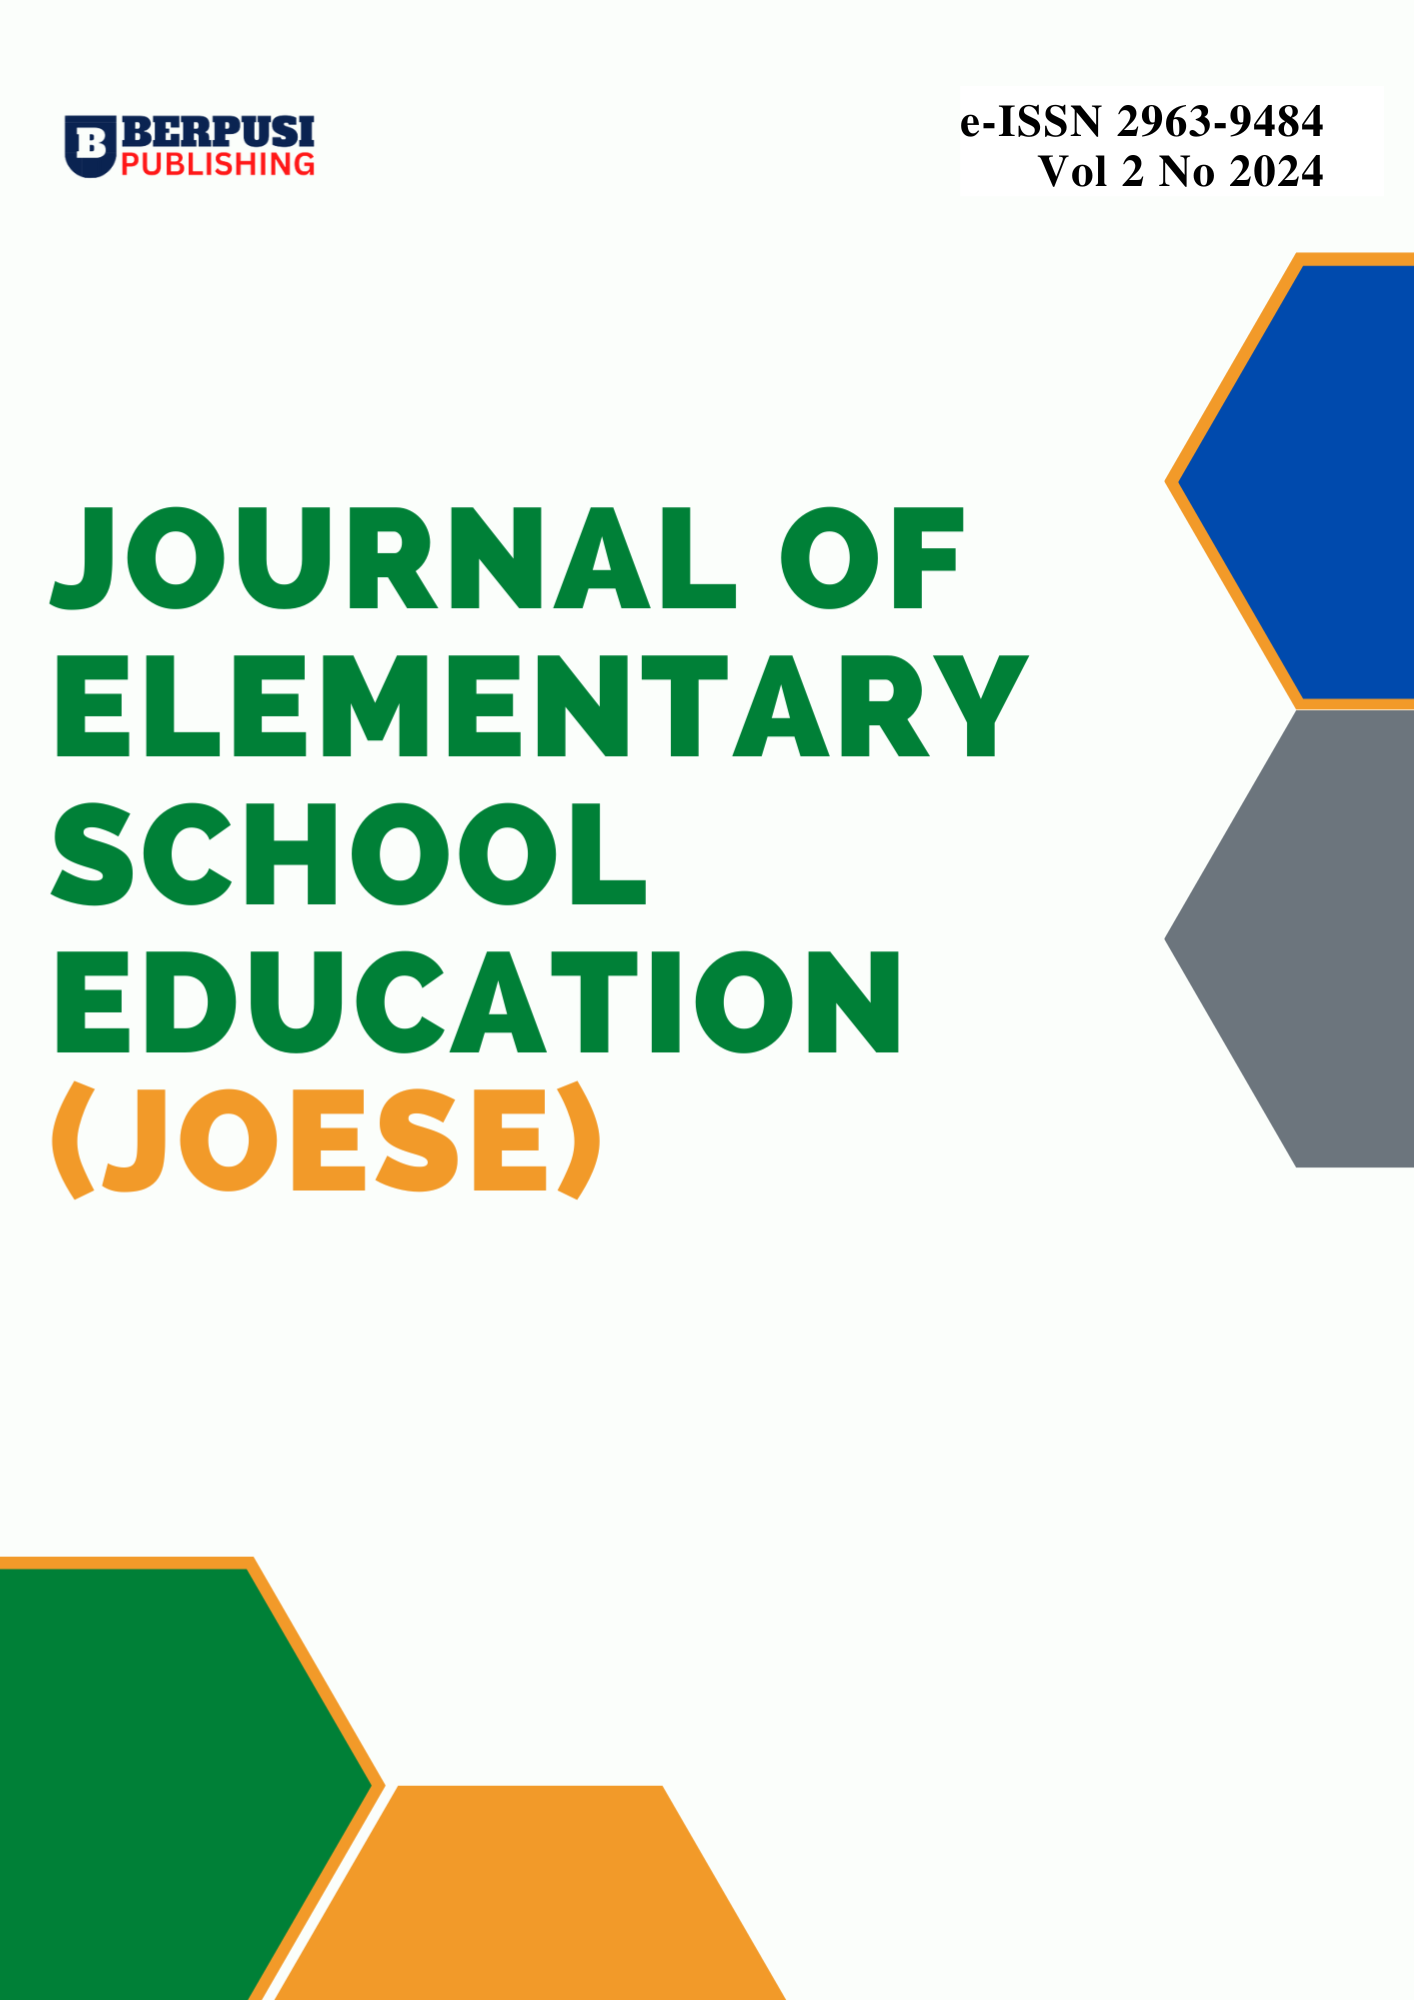 					View Vol 2 No 2 Journal of Elementary School Education, (January, 2024)
				